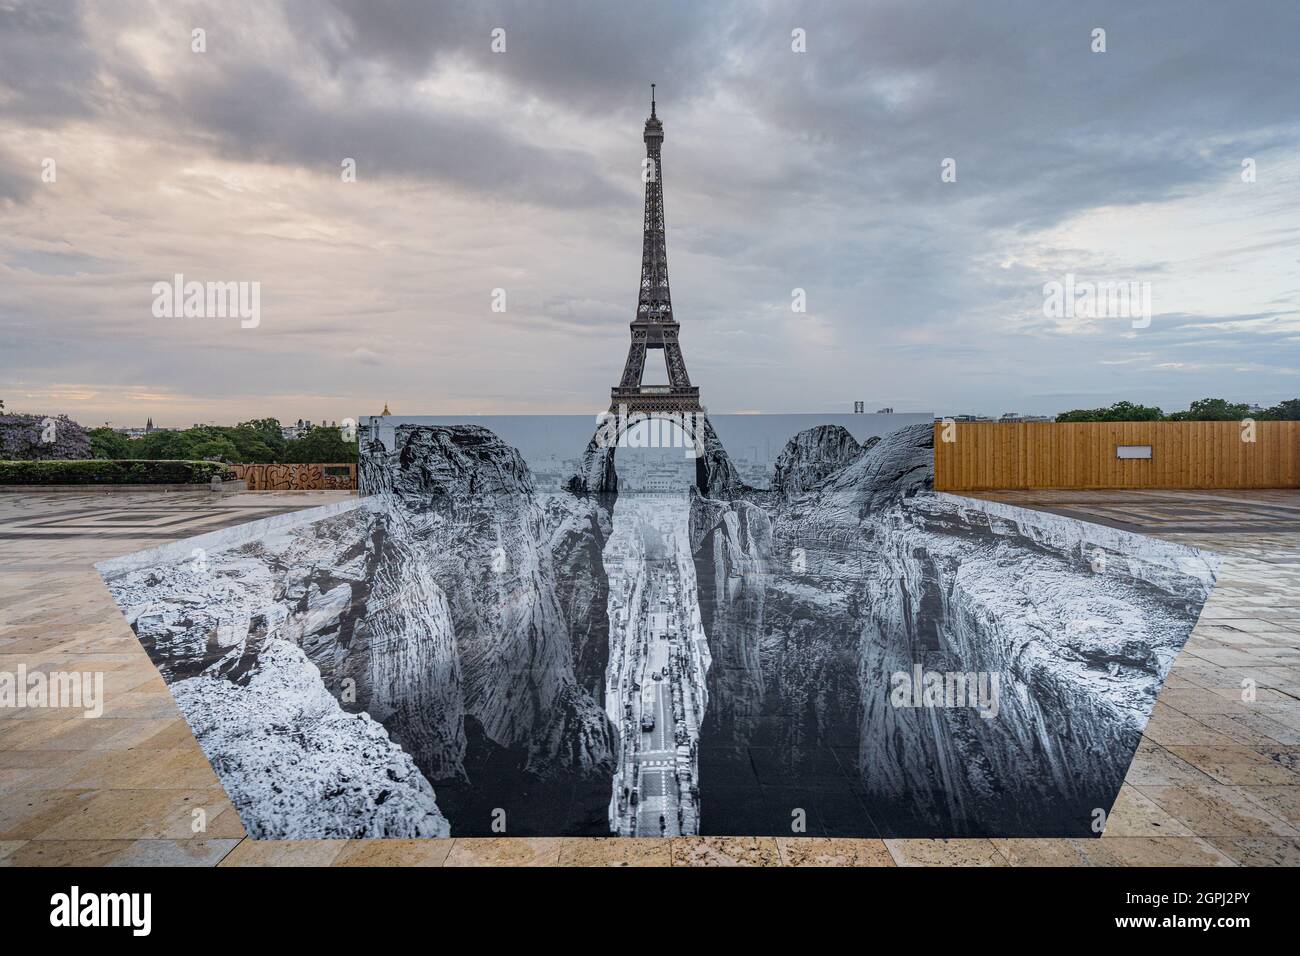 JR anamorphic artwork in front of the Eiffel Tower in Paris Stock Photo